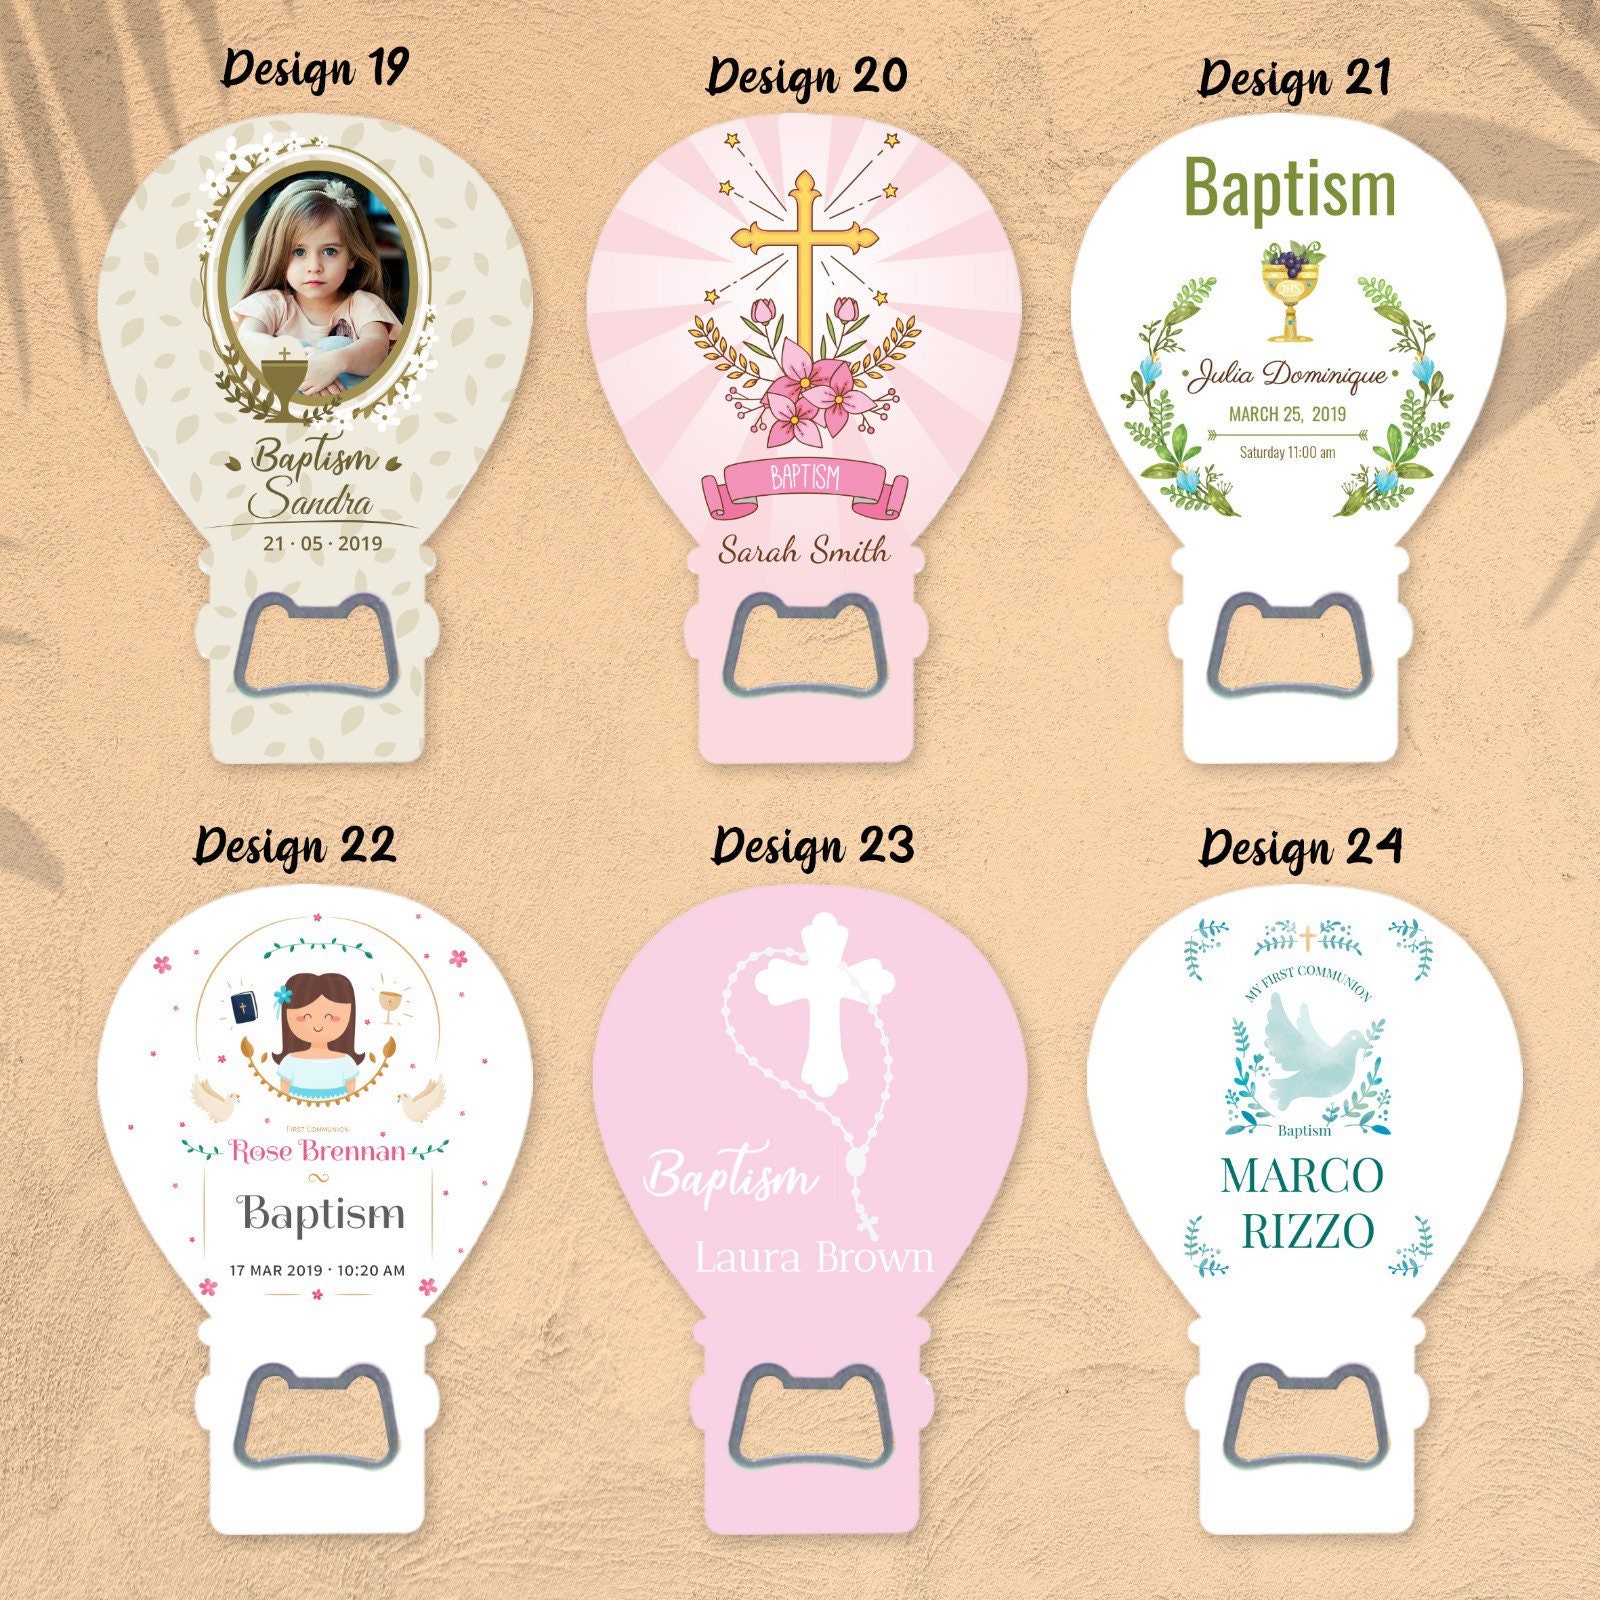 Custom Fridge Magnets Next Day Shipping High-quality Prints Baptism Photo  Magnets Personalized Religious Favors Keepsake Souvenirs 